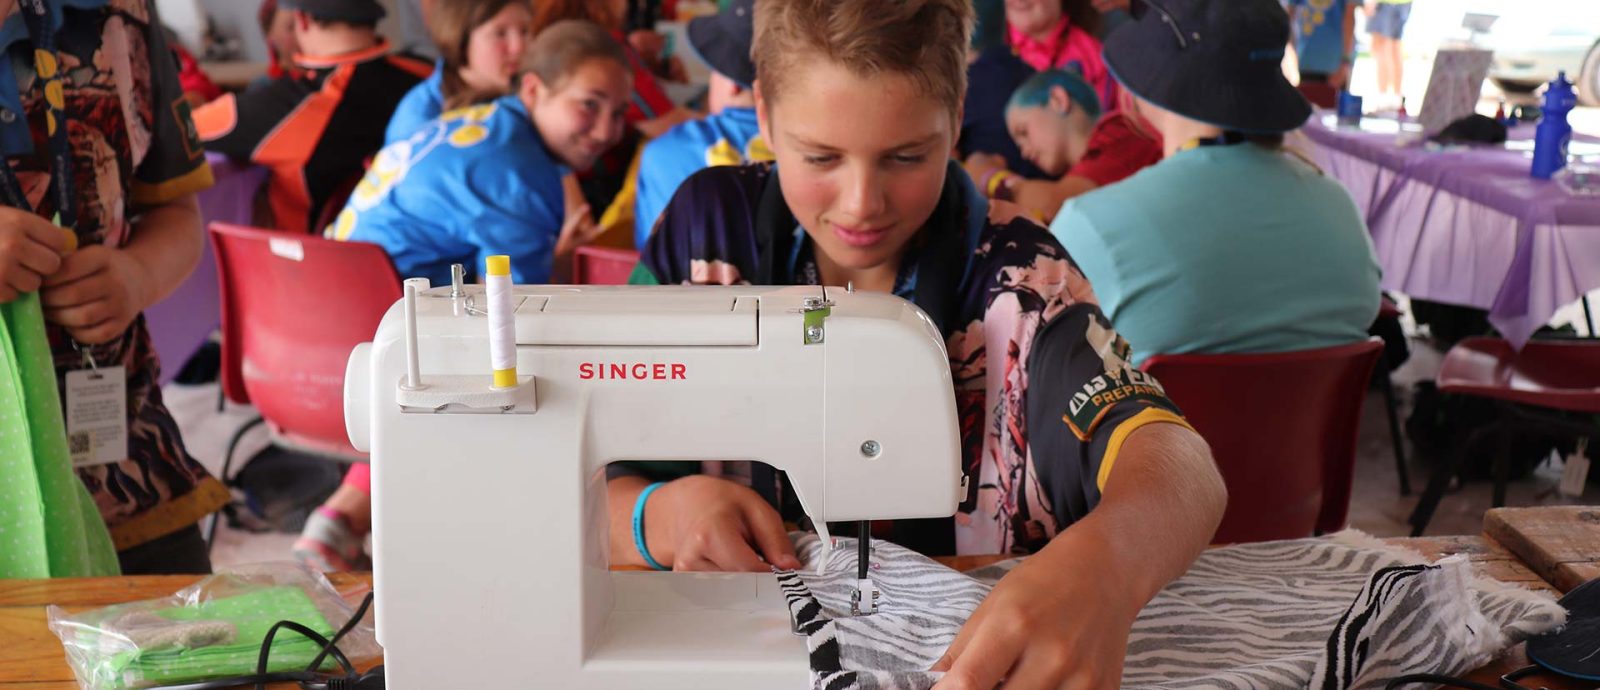 scouts-kids-sewing-singer